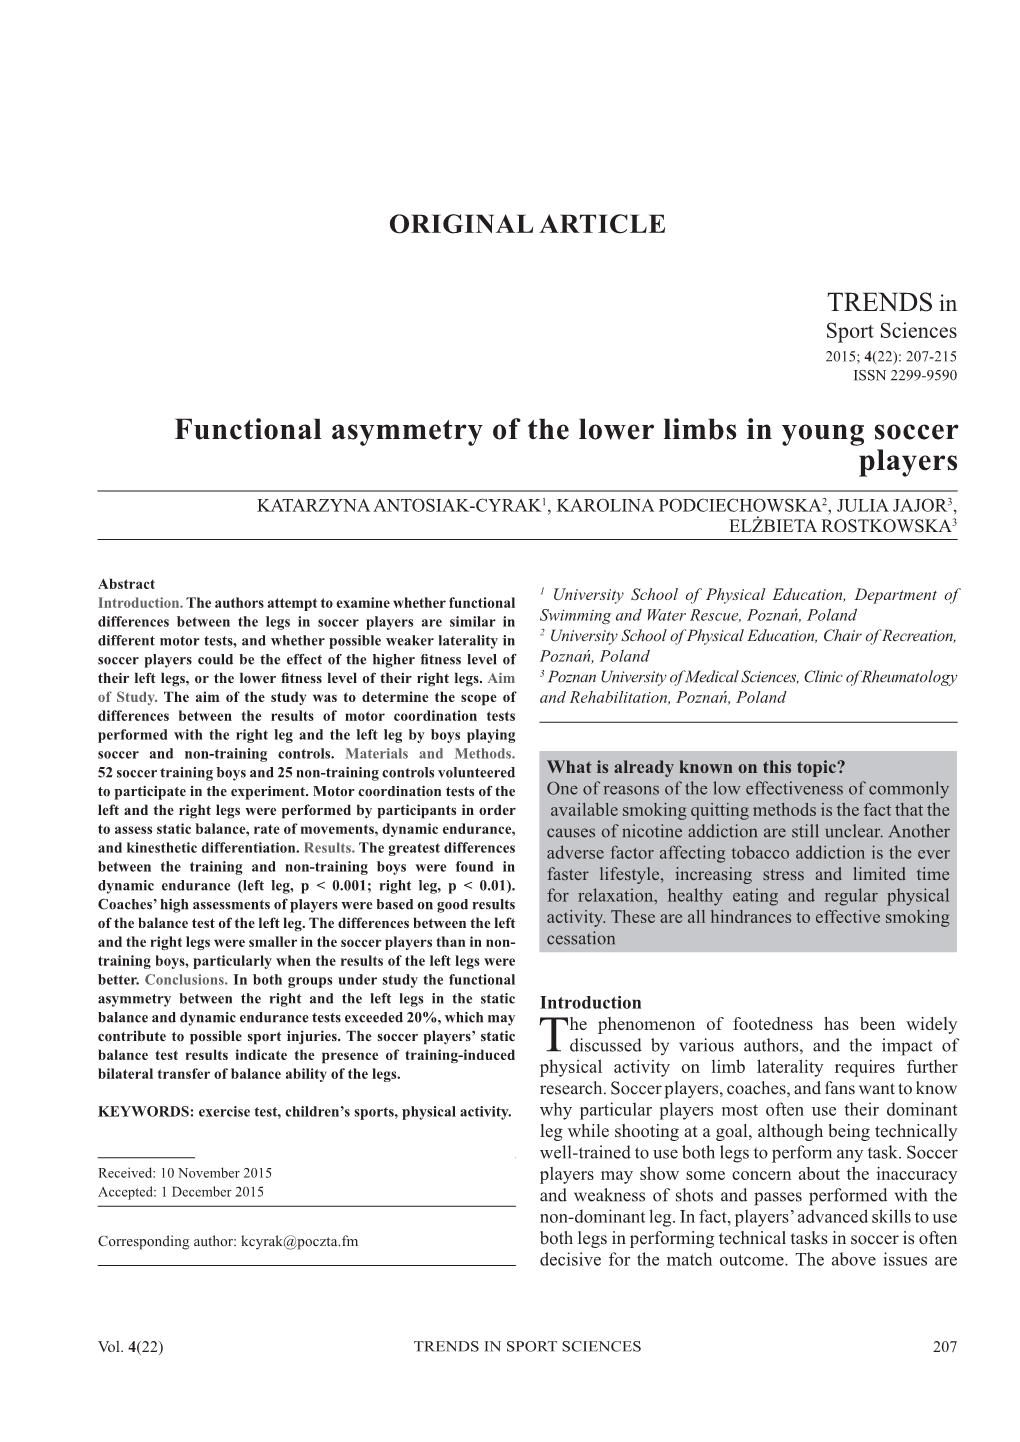 Functional Asymmetry of the Lower Limbs in Young Soccer Players